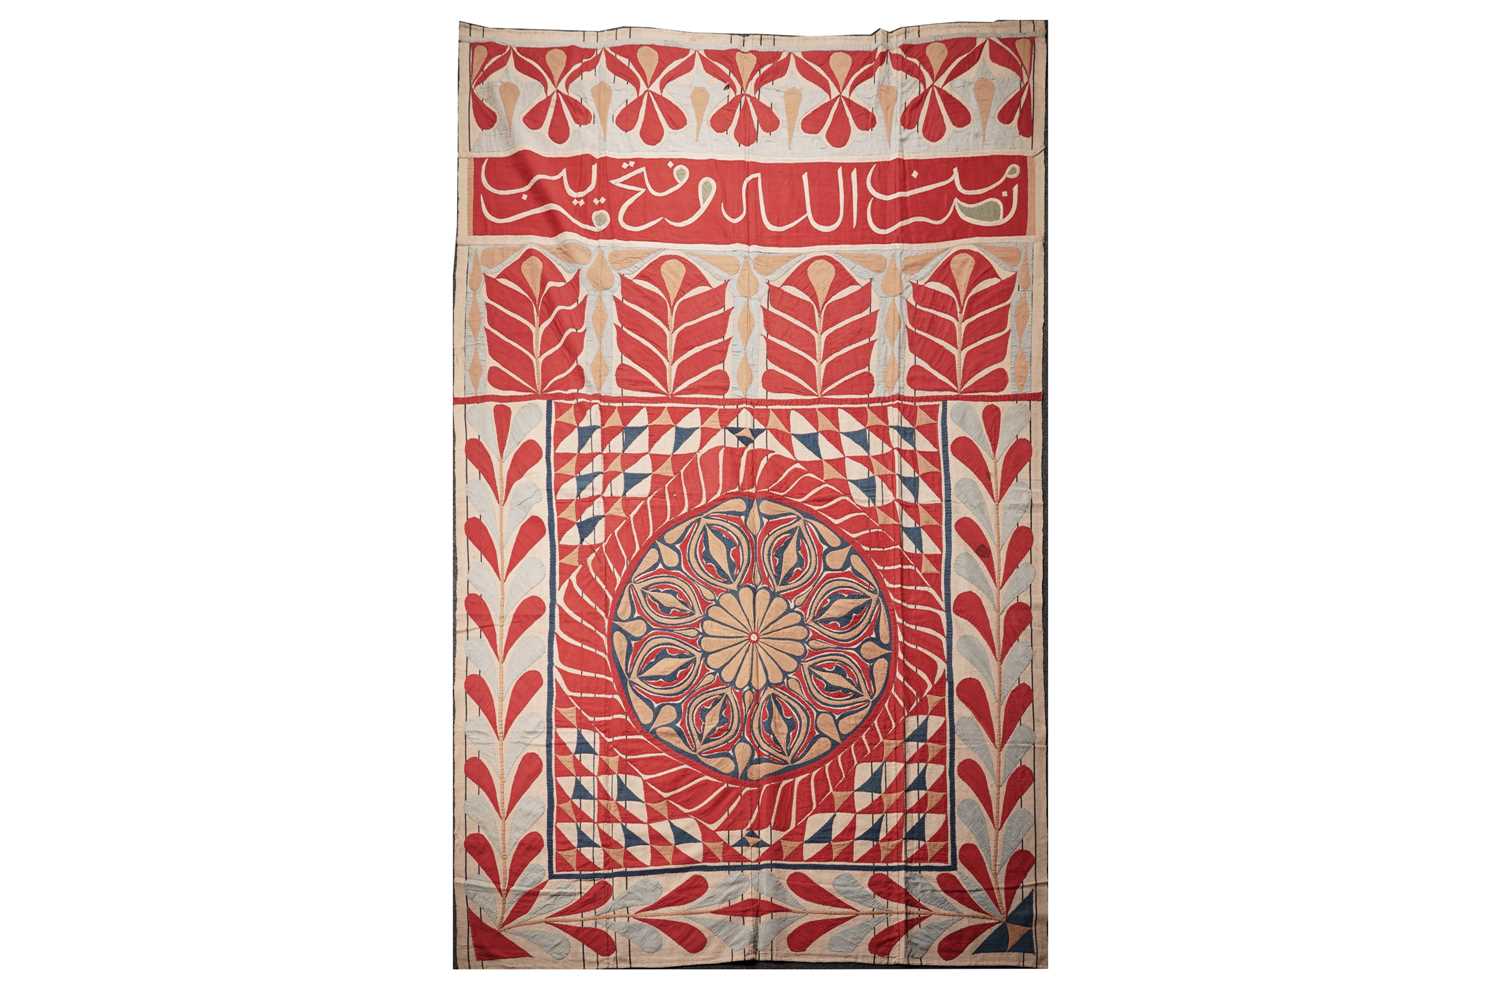 Lot 1016 - Antique Egyptian Khayamiya from the collection of German-American architect John A. Dempwolf